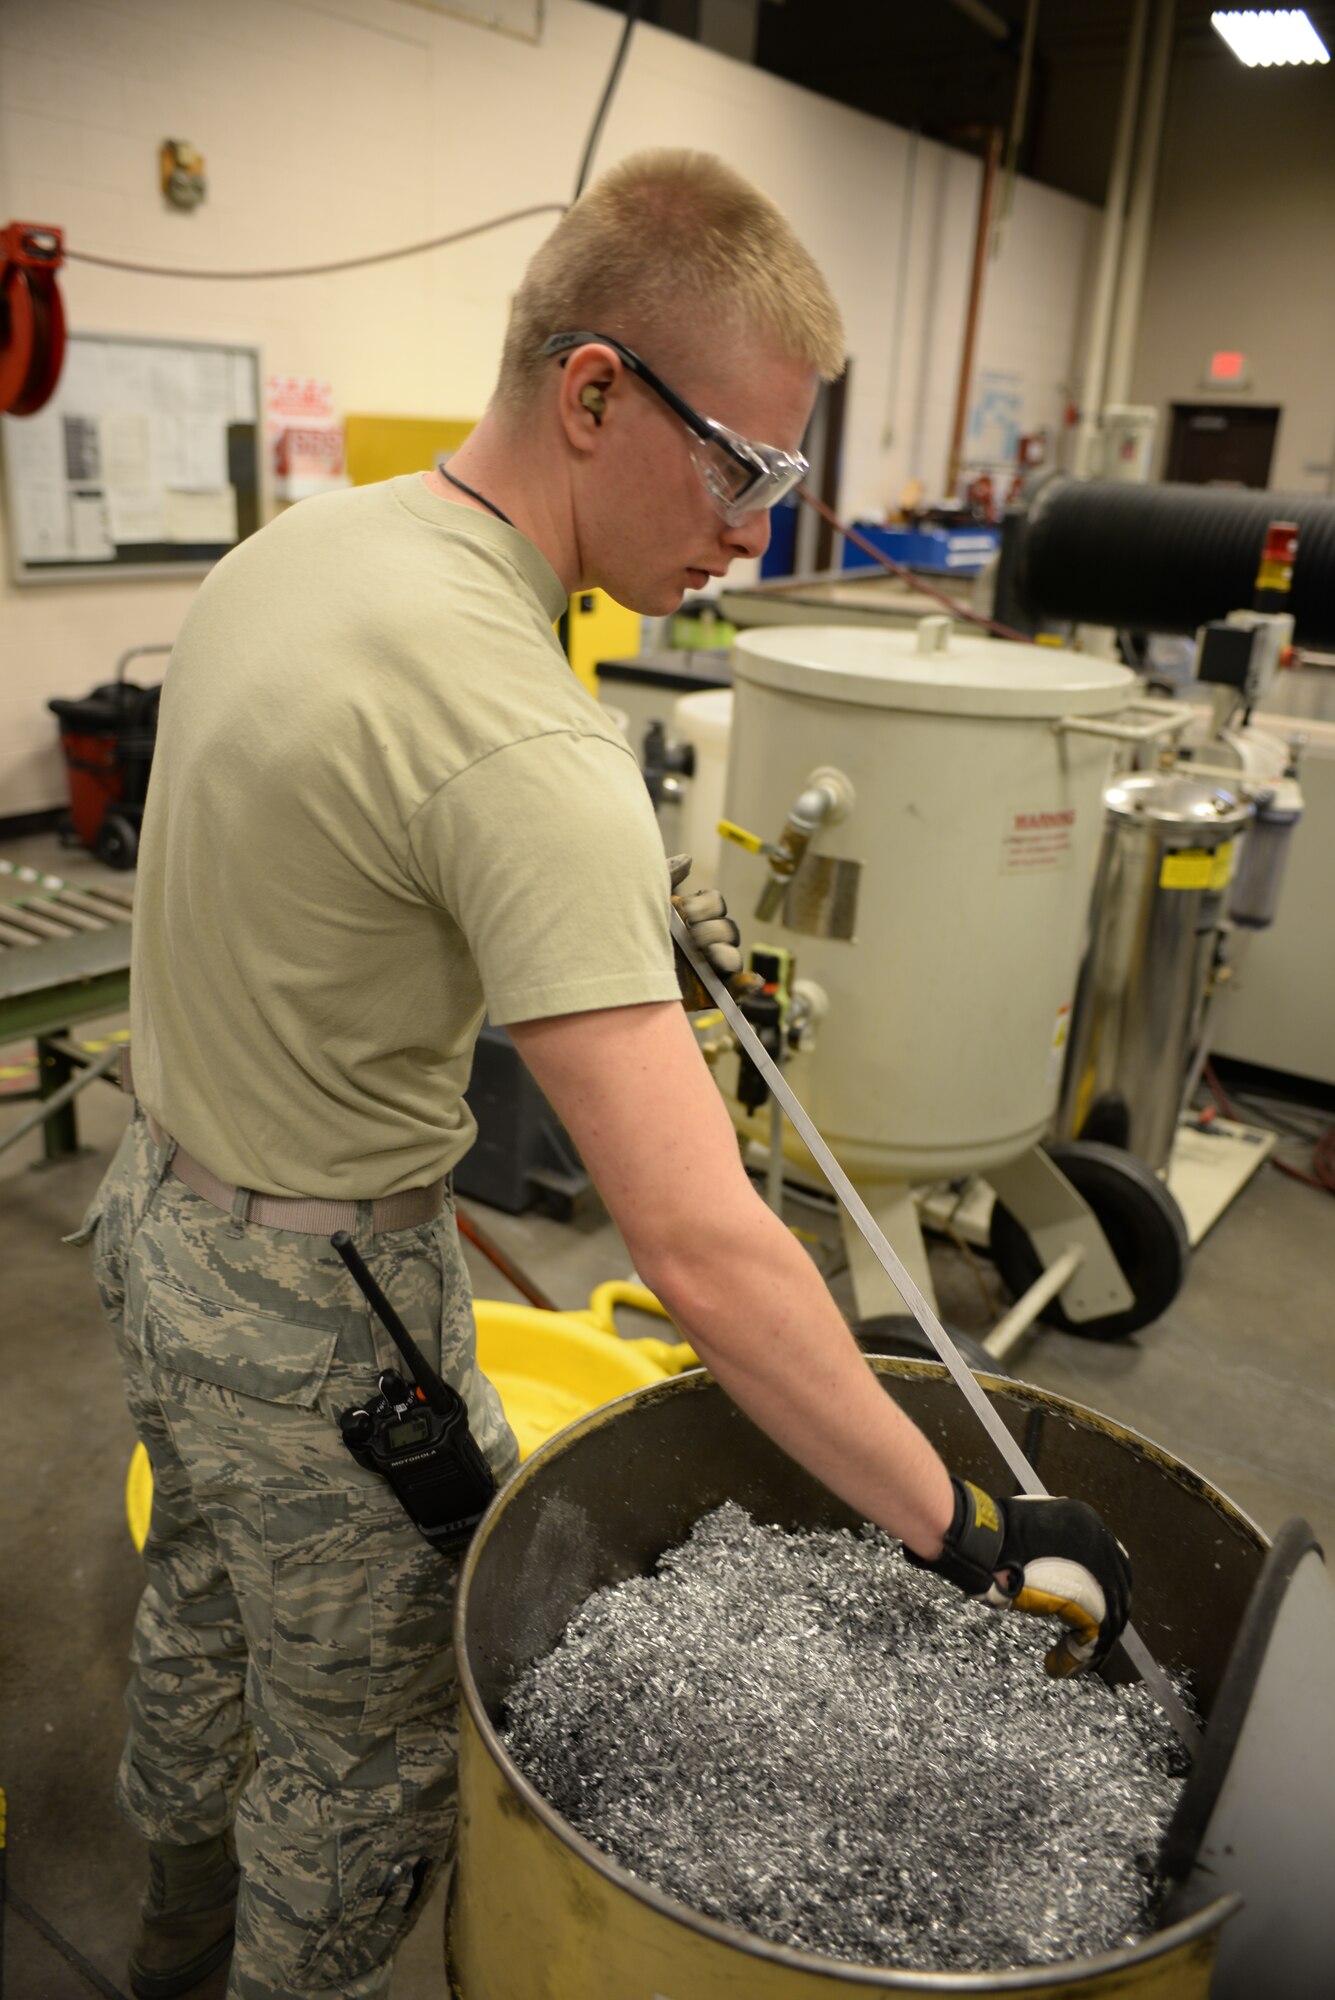 Senior Airman Brian Freeman, 28th Maintenance Squadron metals technician, collects scrap metal from a Haas VF 4 machine at Ellsworth Air Force Base, S.D., Jan. 6, 2016. To help the base’s budget, scrap metal is collected and then recycled. The metals flight creates aircraft parts that cannot be ordered through a supplies list. (U.S. Air Force photo by Airman Sadie Colbert/Released)